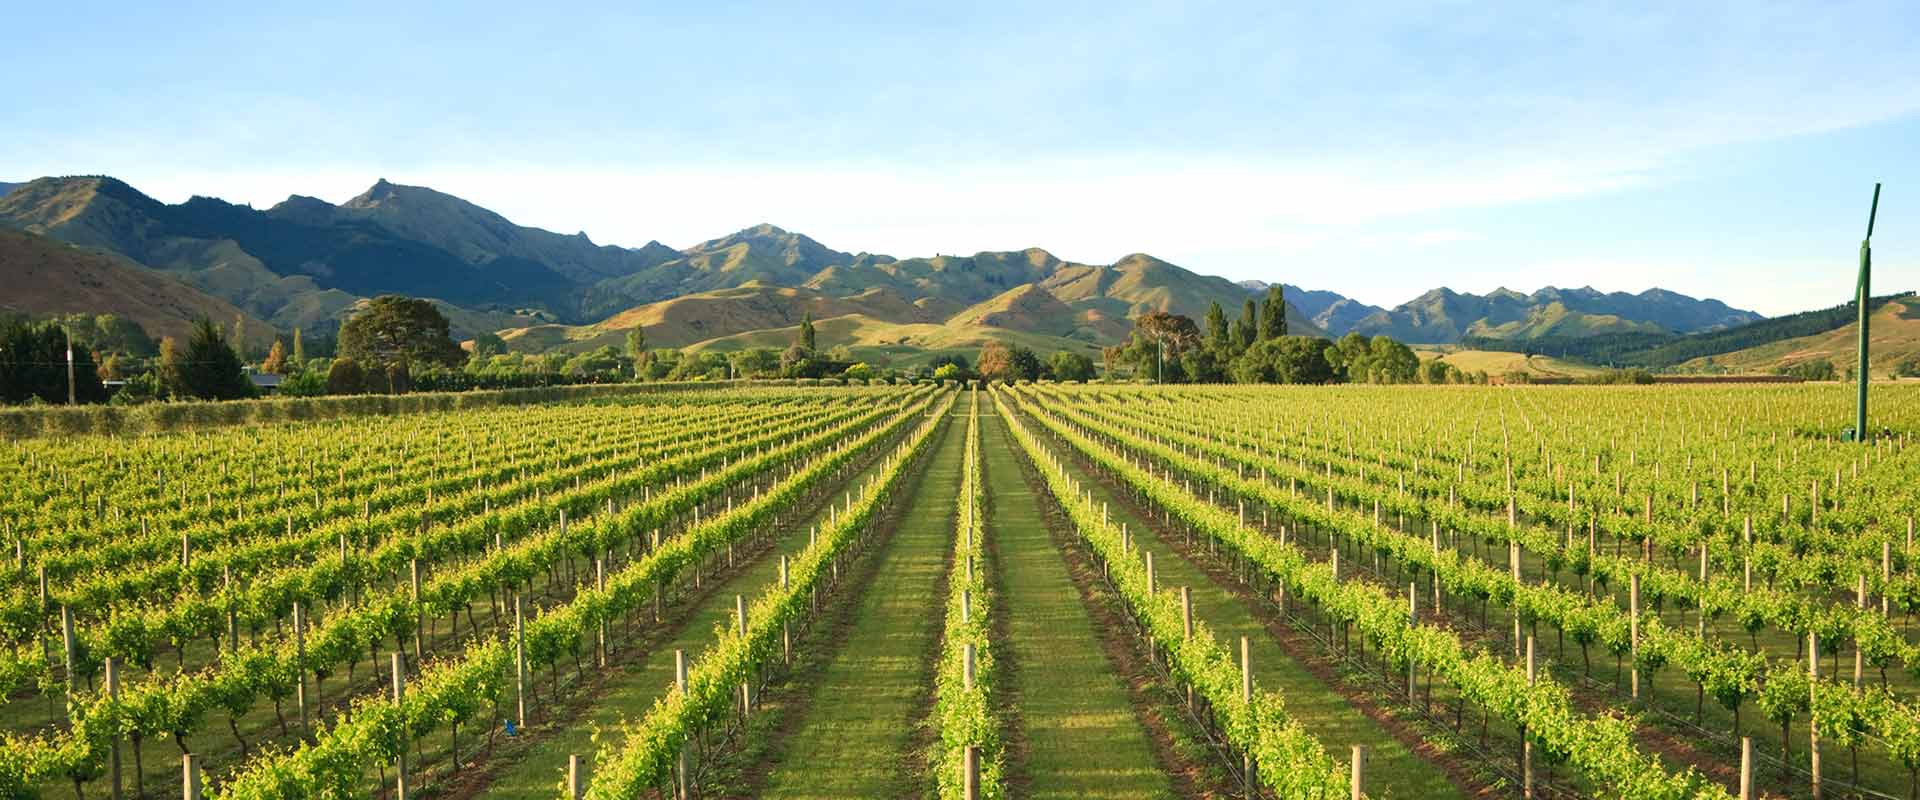 Rows of lush green vines, New Zealand